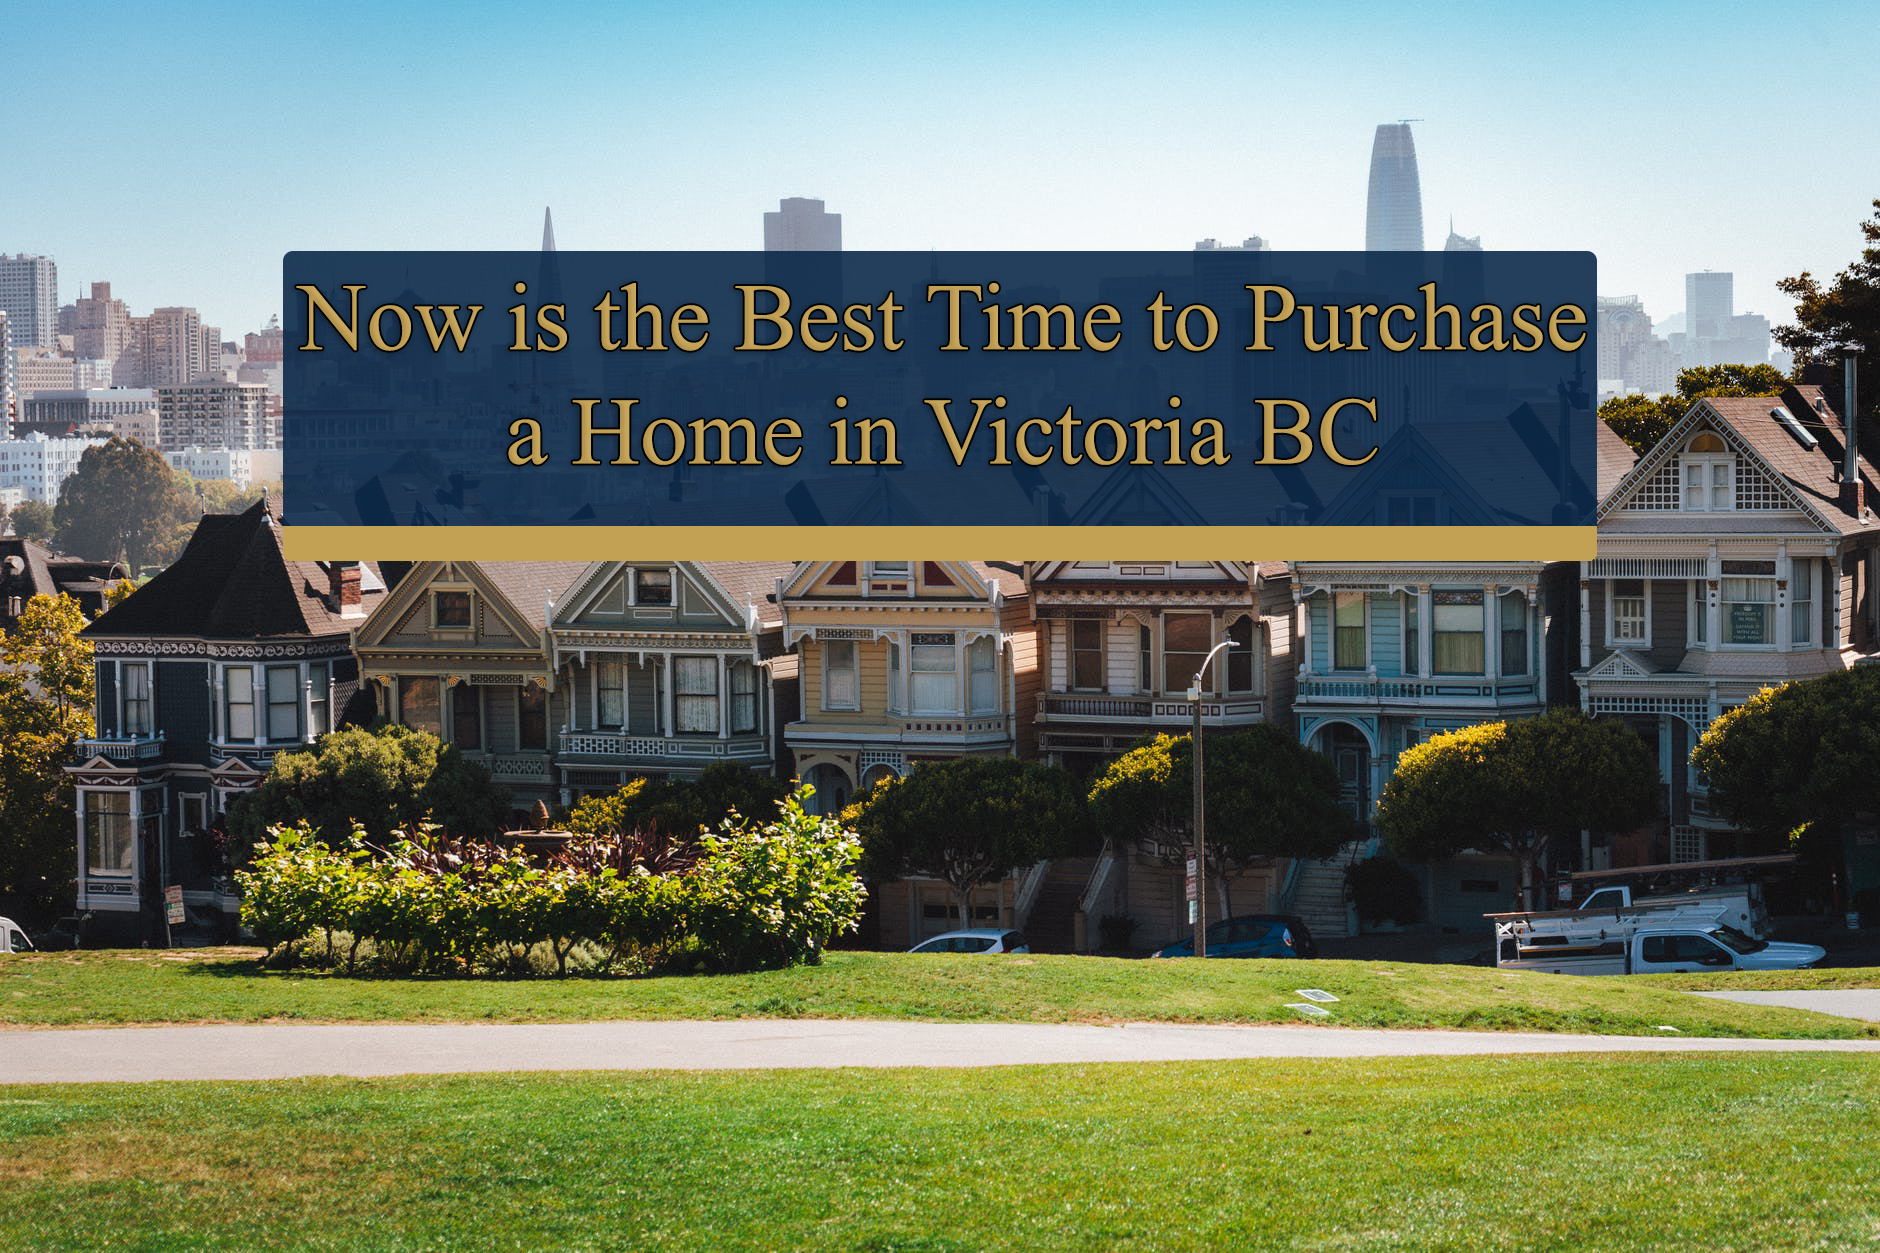 Now is the Best Time to Purchase a Home in Victoria BC